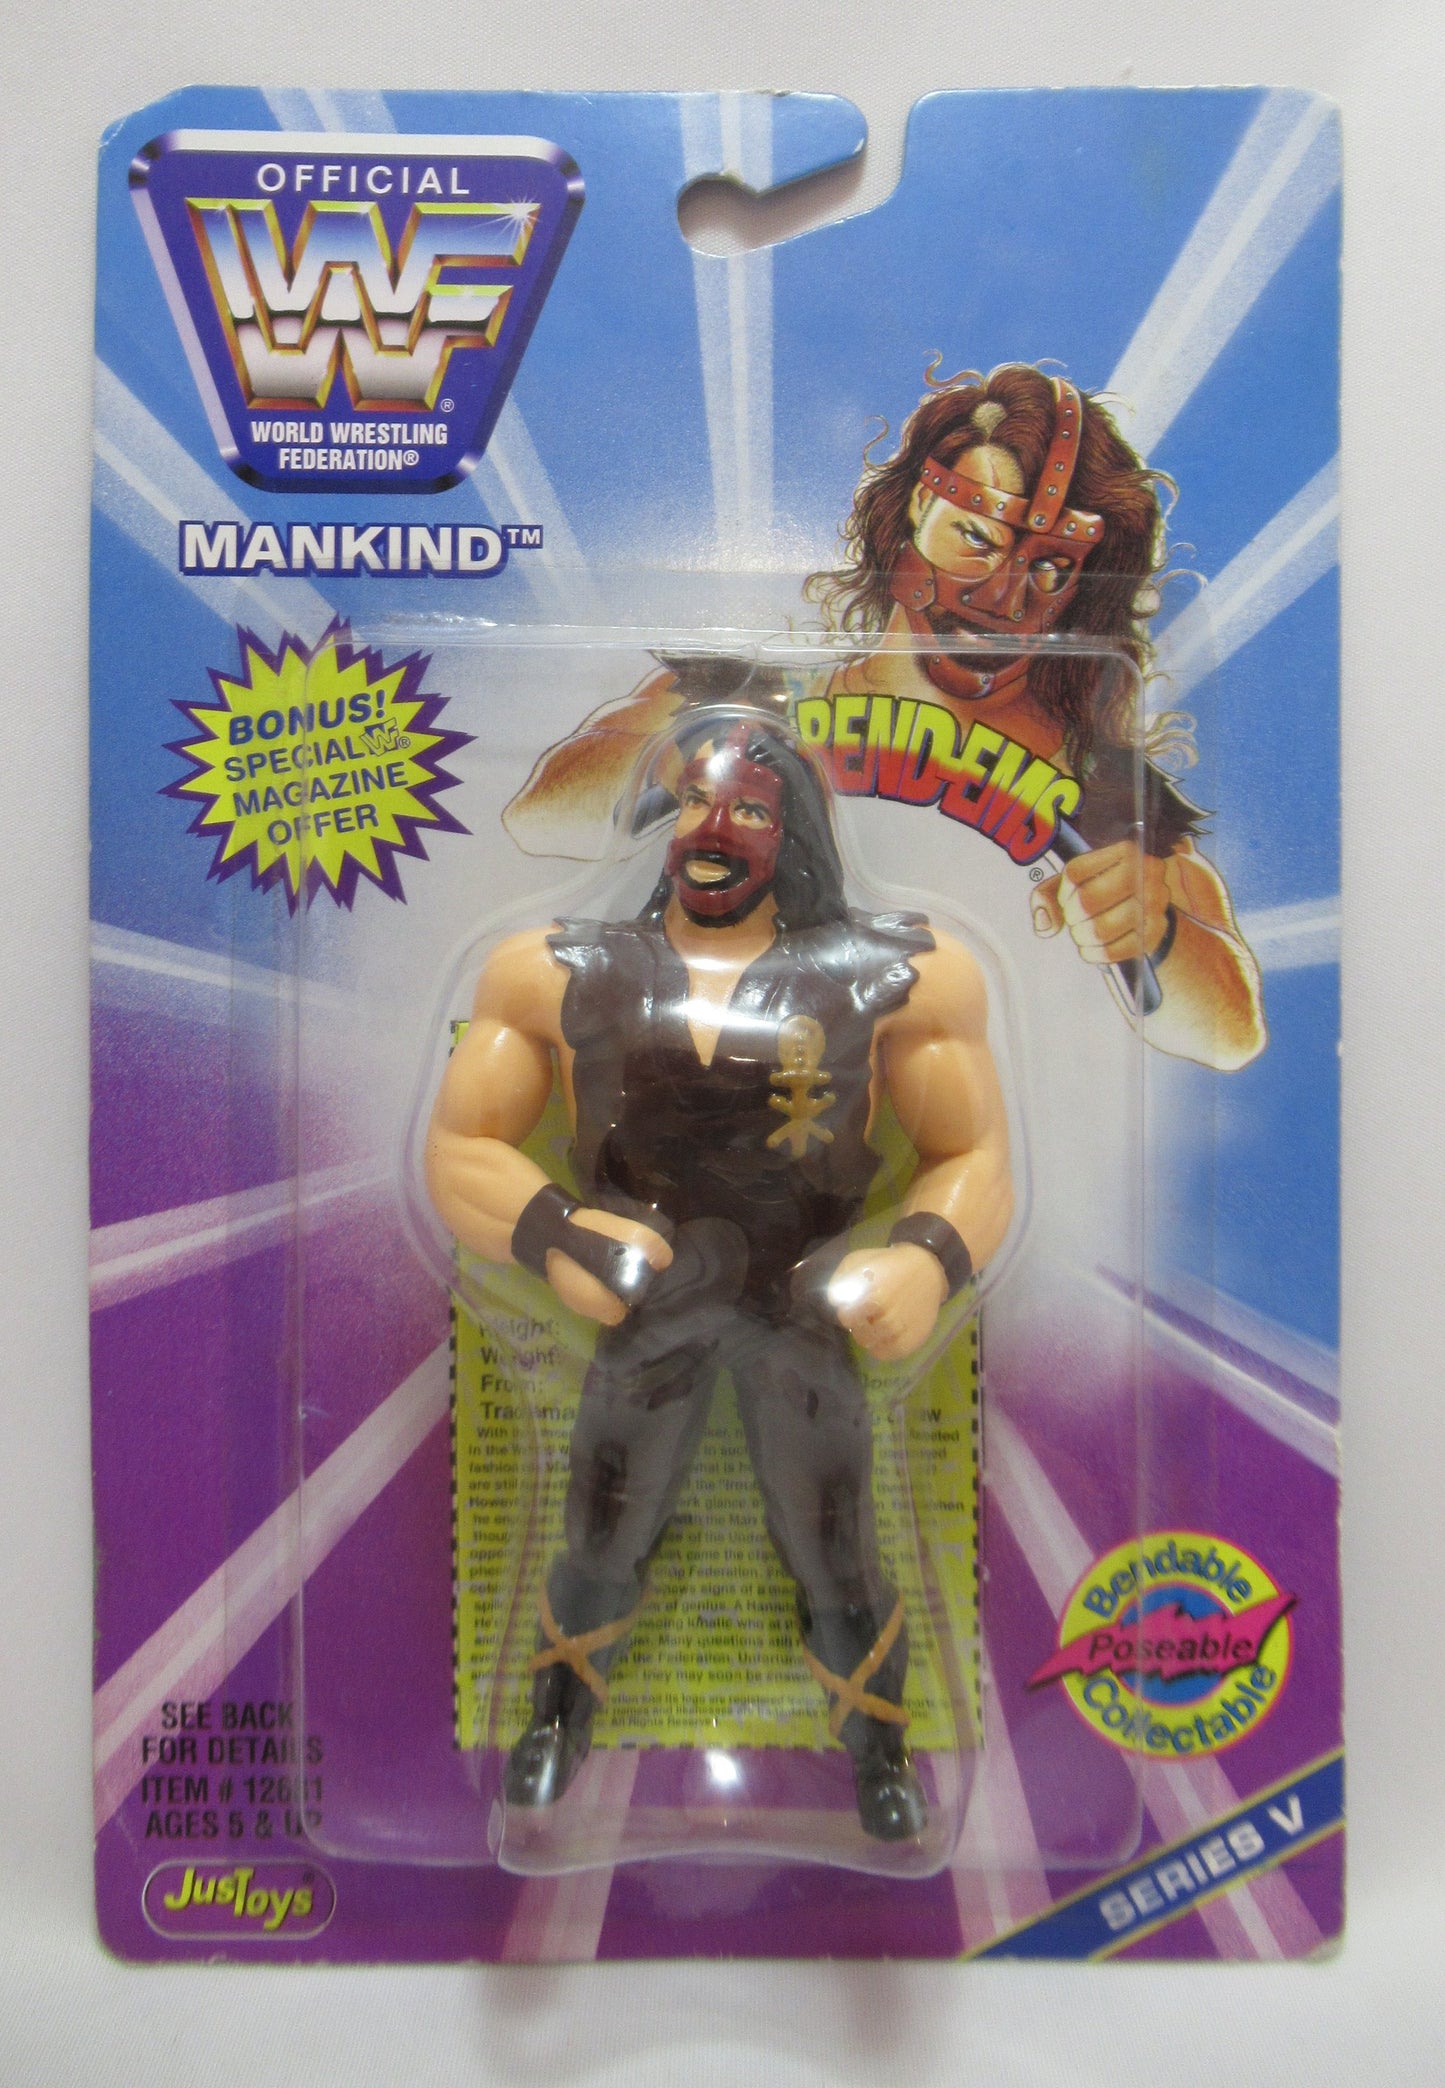 1997 WWF Just Toys Bend-Ems Series 5 Mankind